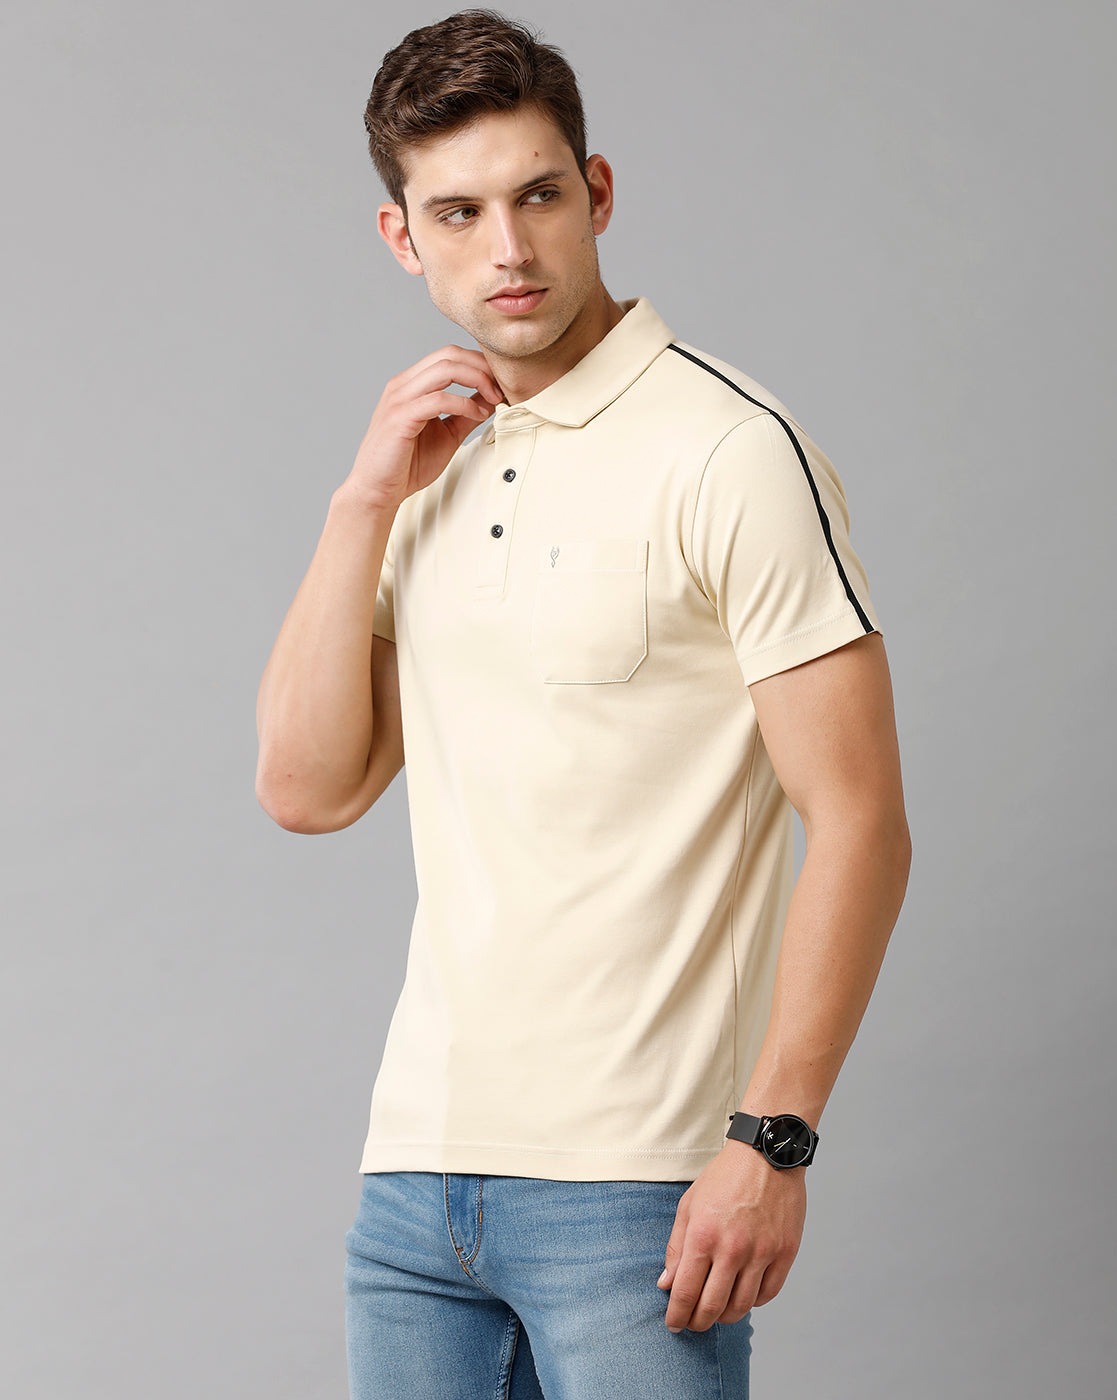 Classic Polo Mens Cotton Solid Half Sleeve Slim Fit Polo Neck Yellow Color T-Shirt | Prm 740 C